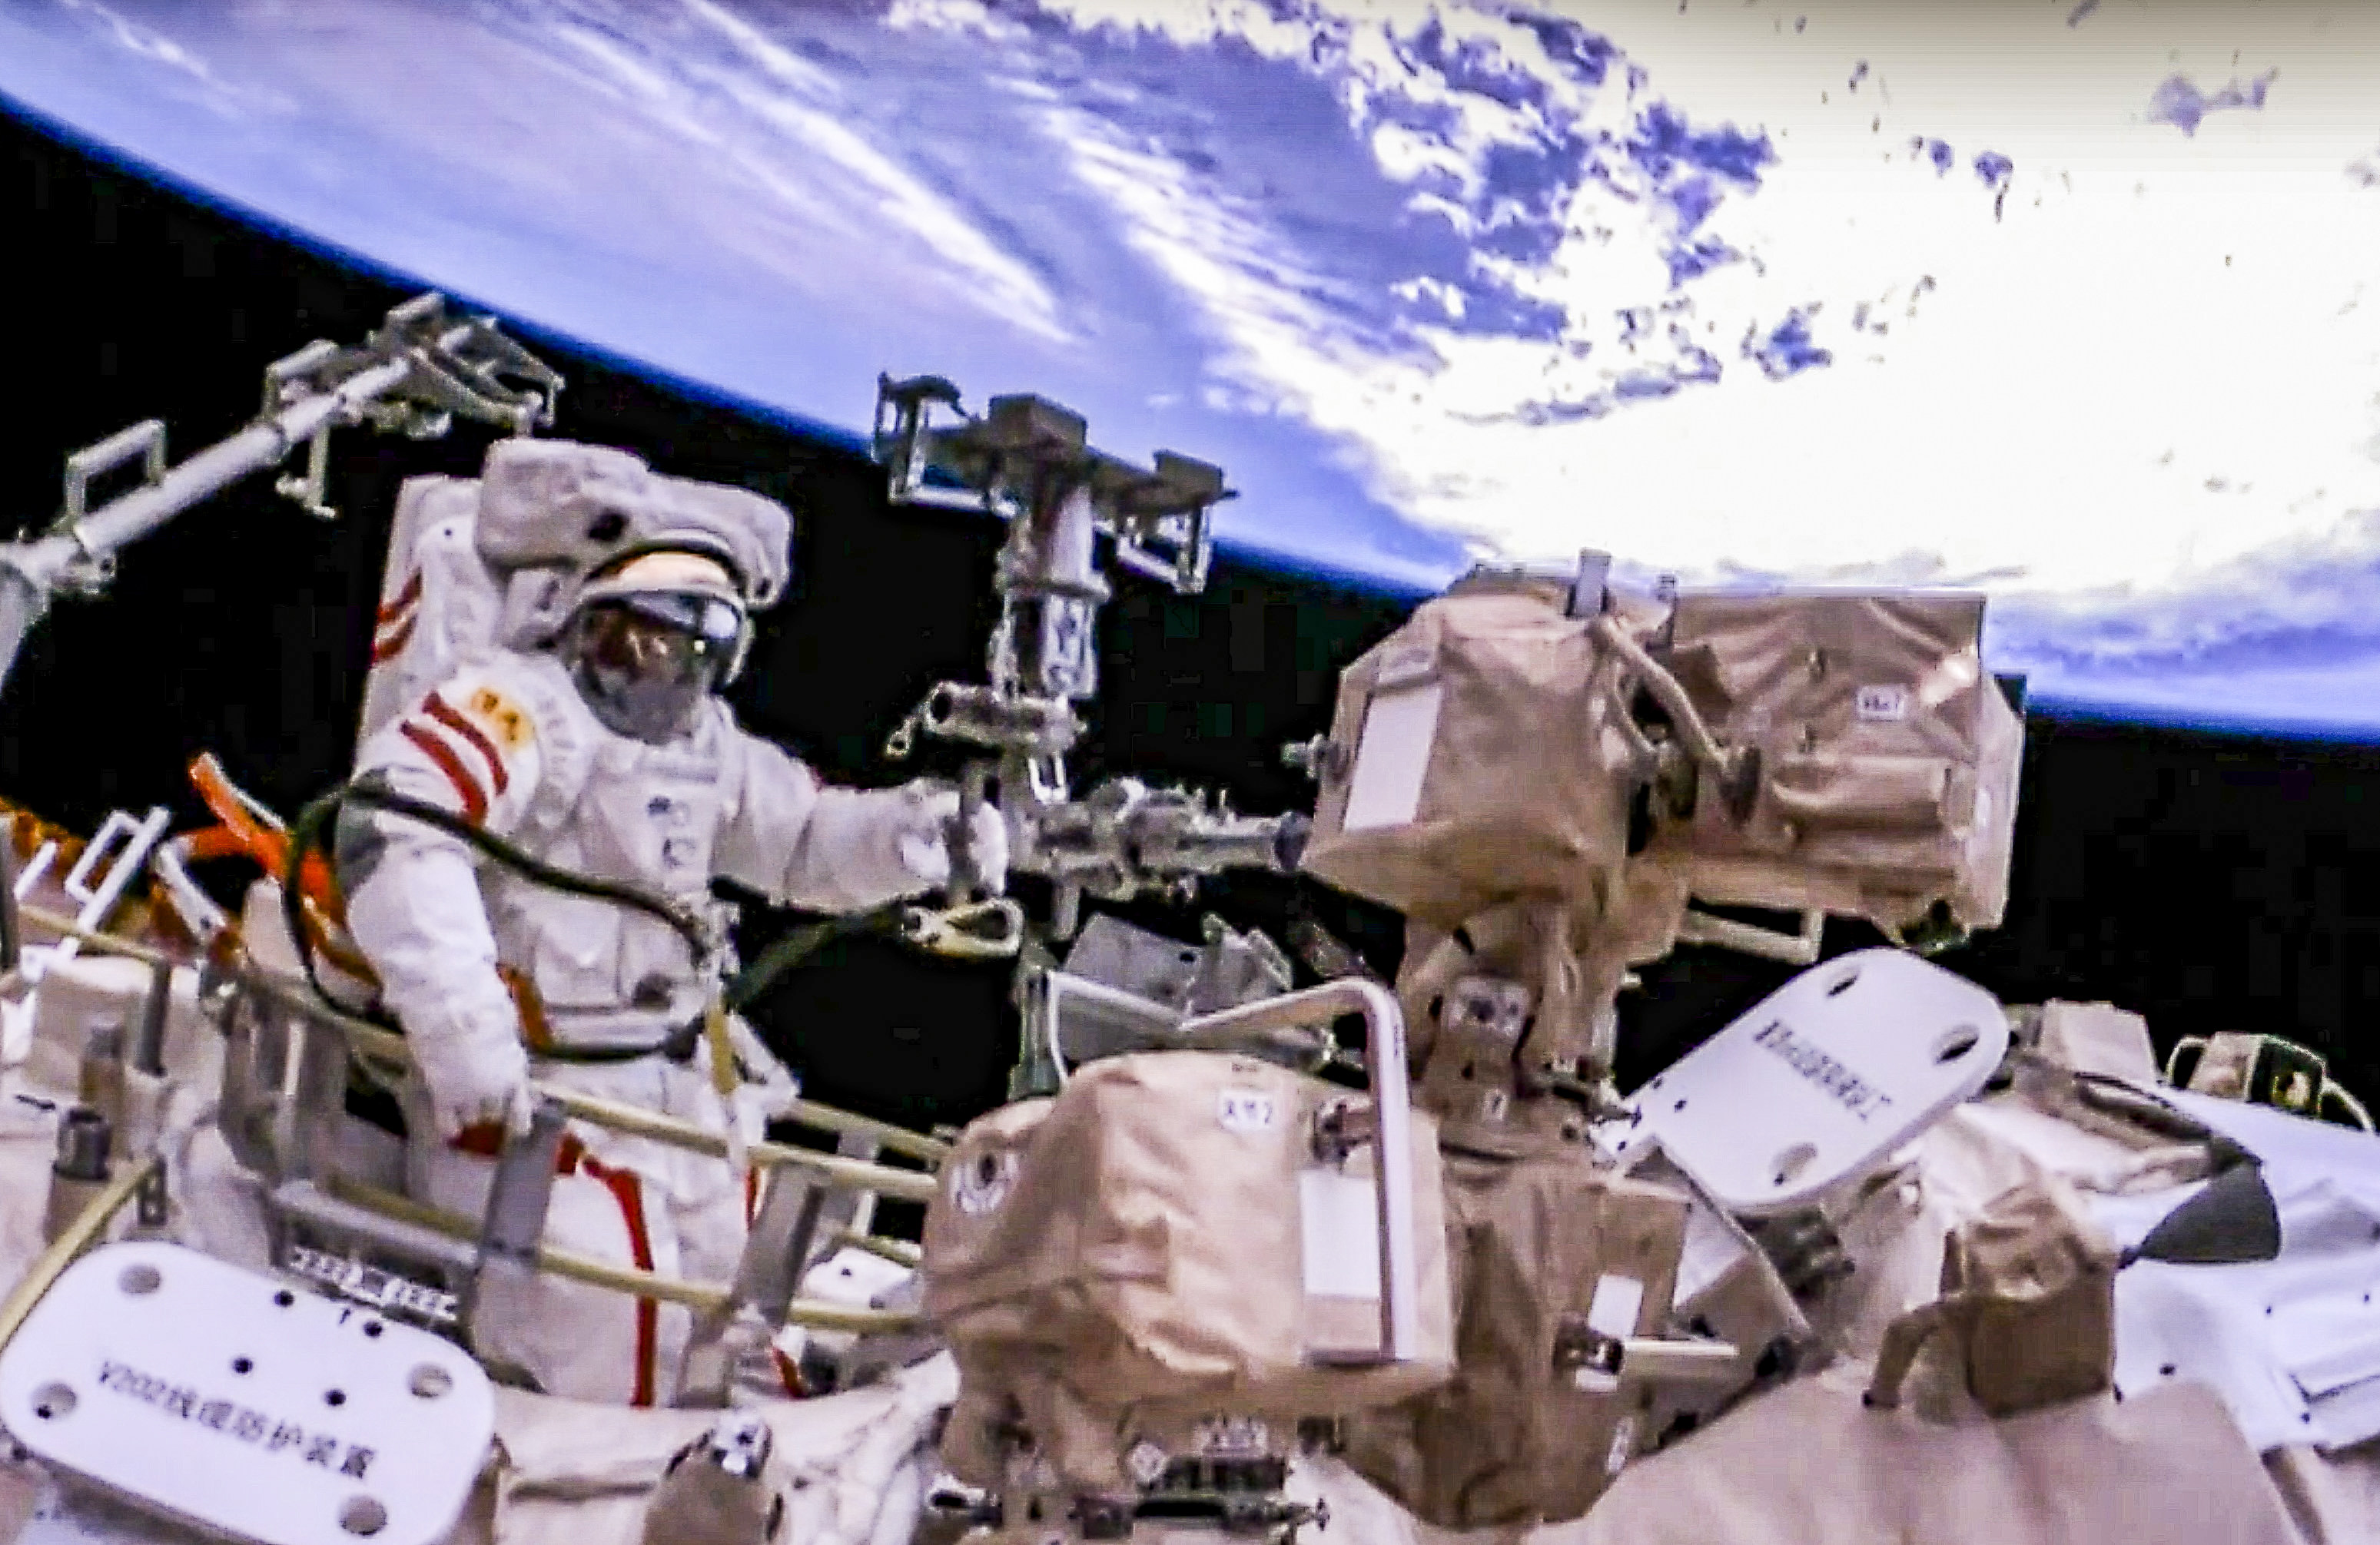 Astronaut Fei Junlong takes a space walk from the Tiangong space station on February 9.
Photo: CCTV